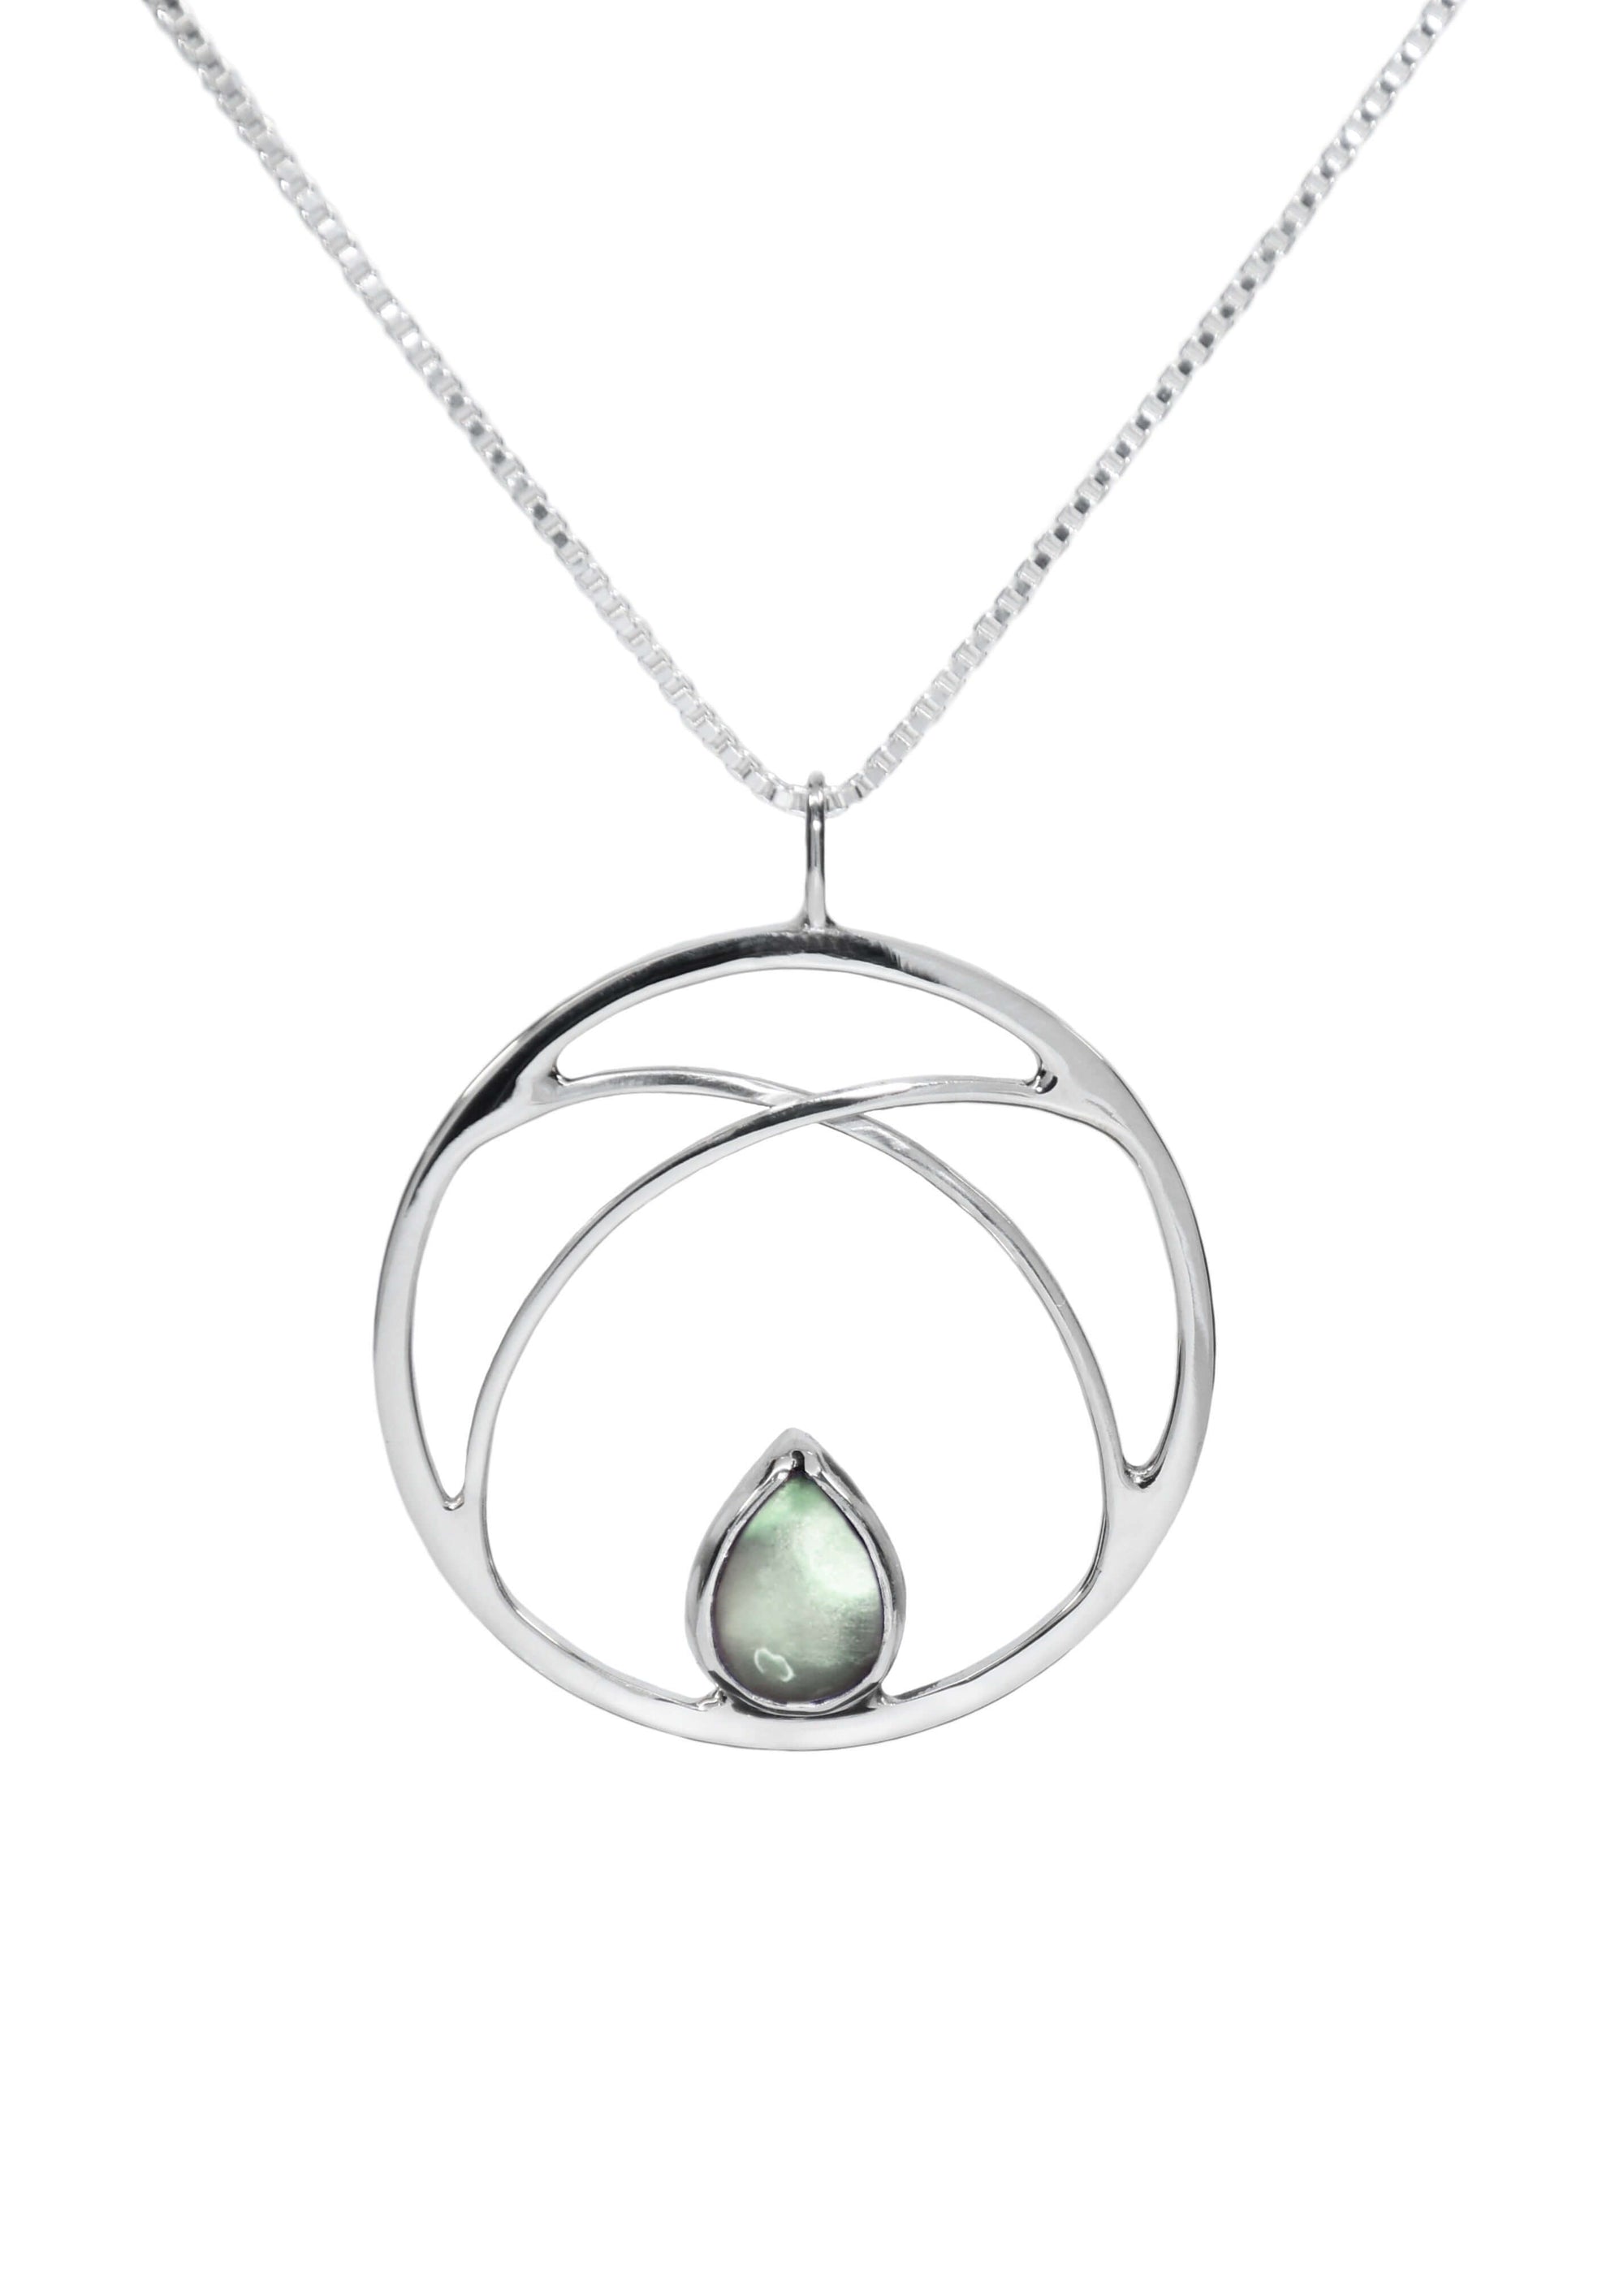 A handmade sterling silver necklace with circle pendant and green amethyst